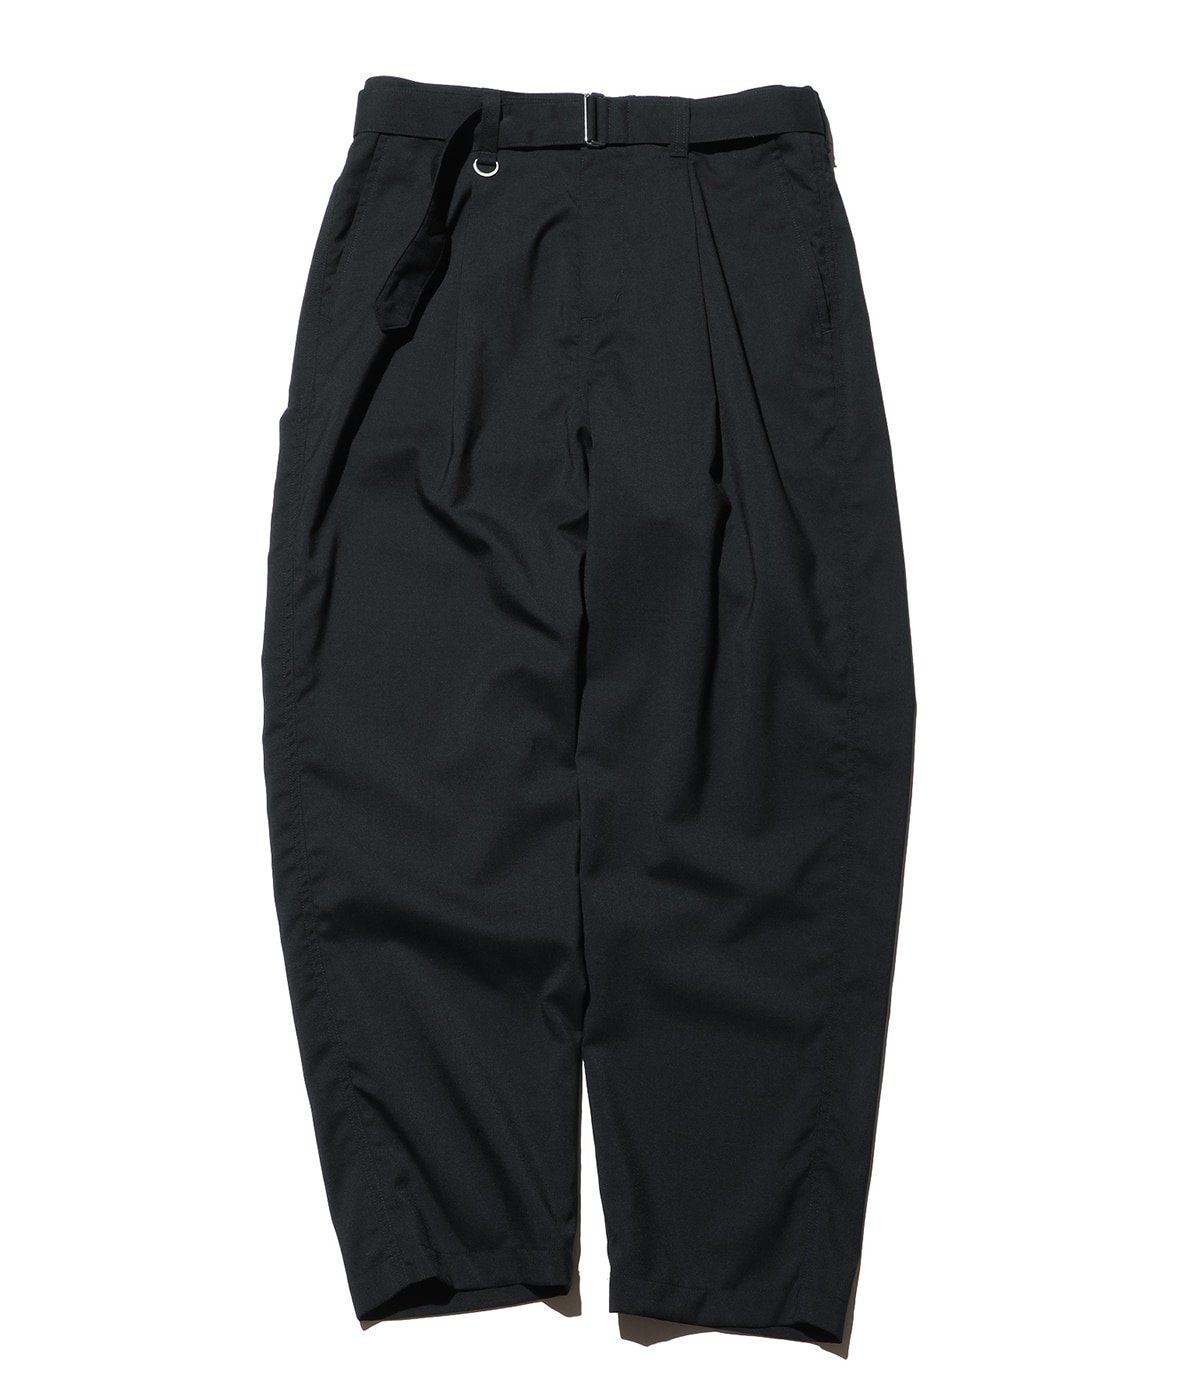 SOPHNET.(ソフネット) WIDE BELTED BAGGY TUCK TAPERED PANTS / パンツ ボトムスその他 (メンズ)の通販  - ARKnets(アークネッツ) 公式通販 【正規取扱店】